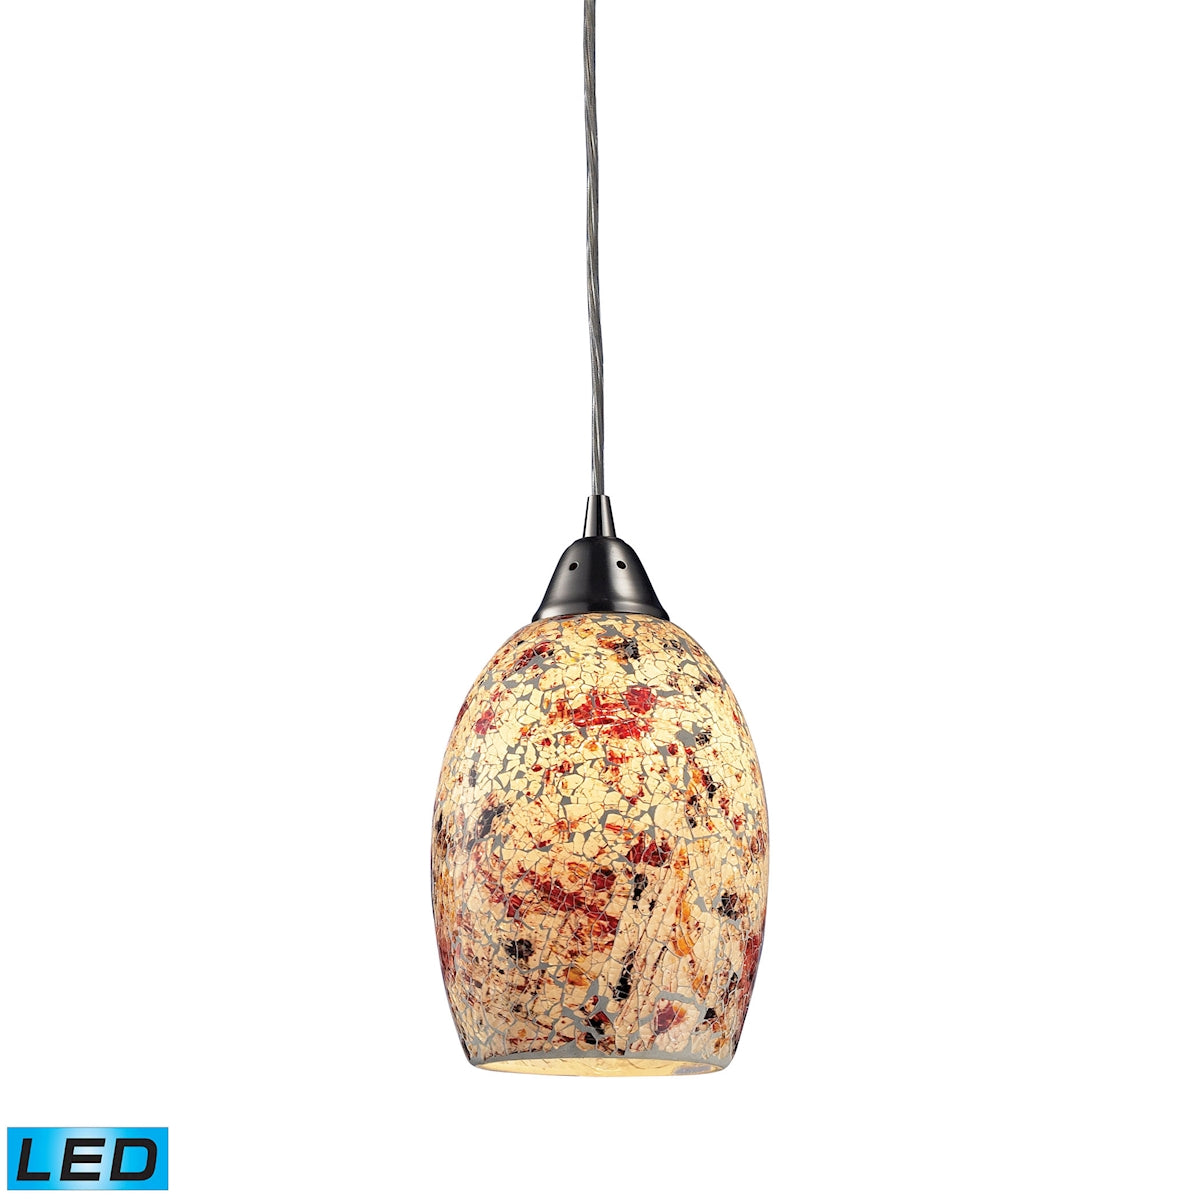 ELK Lighting 73011-1-LED Avalon 1-Light Mini Pendant in Satin Nickel with Multi-colored Crackle Glass - Includes LED Bulb